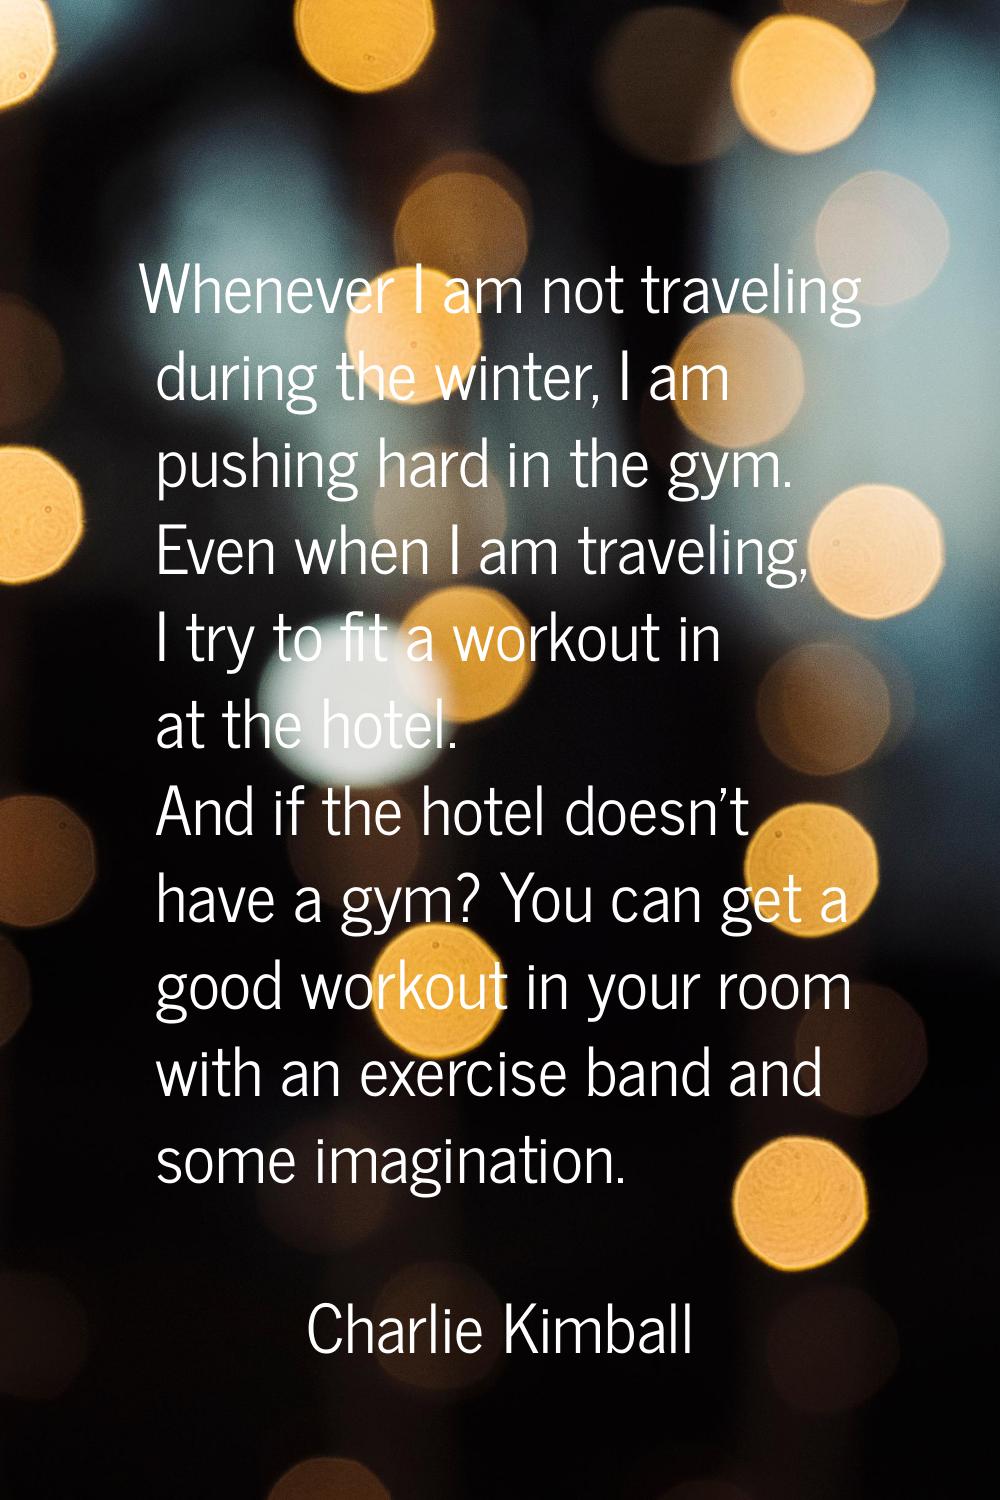 Whenever I am not traveling during the winter, I am pushing hard in the gym. Even when I am traveli